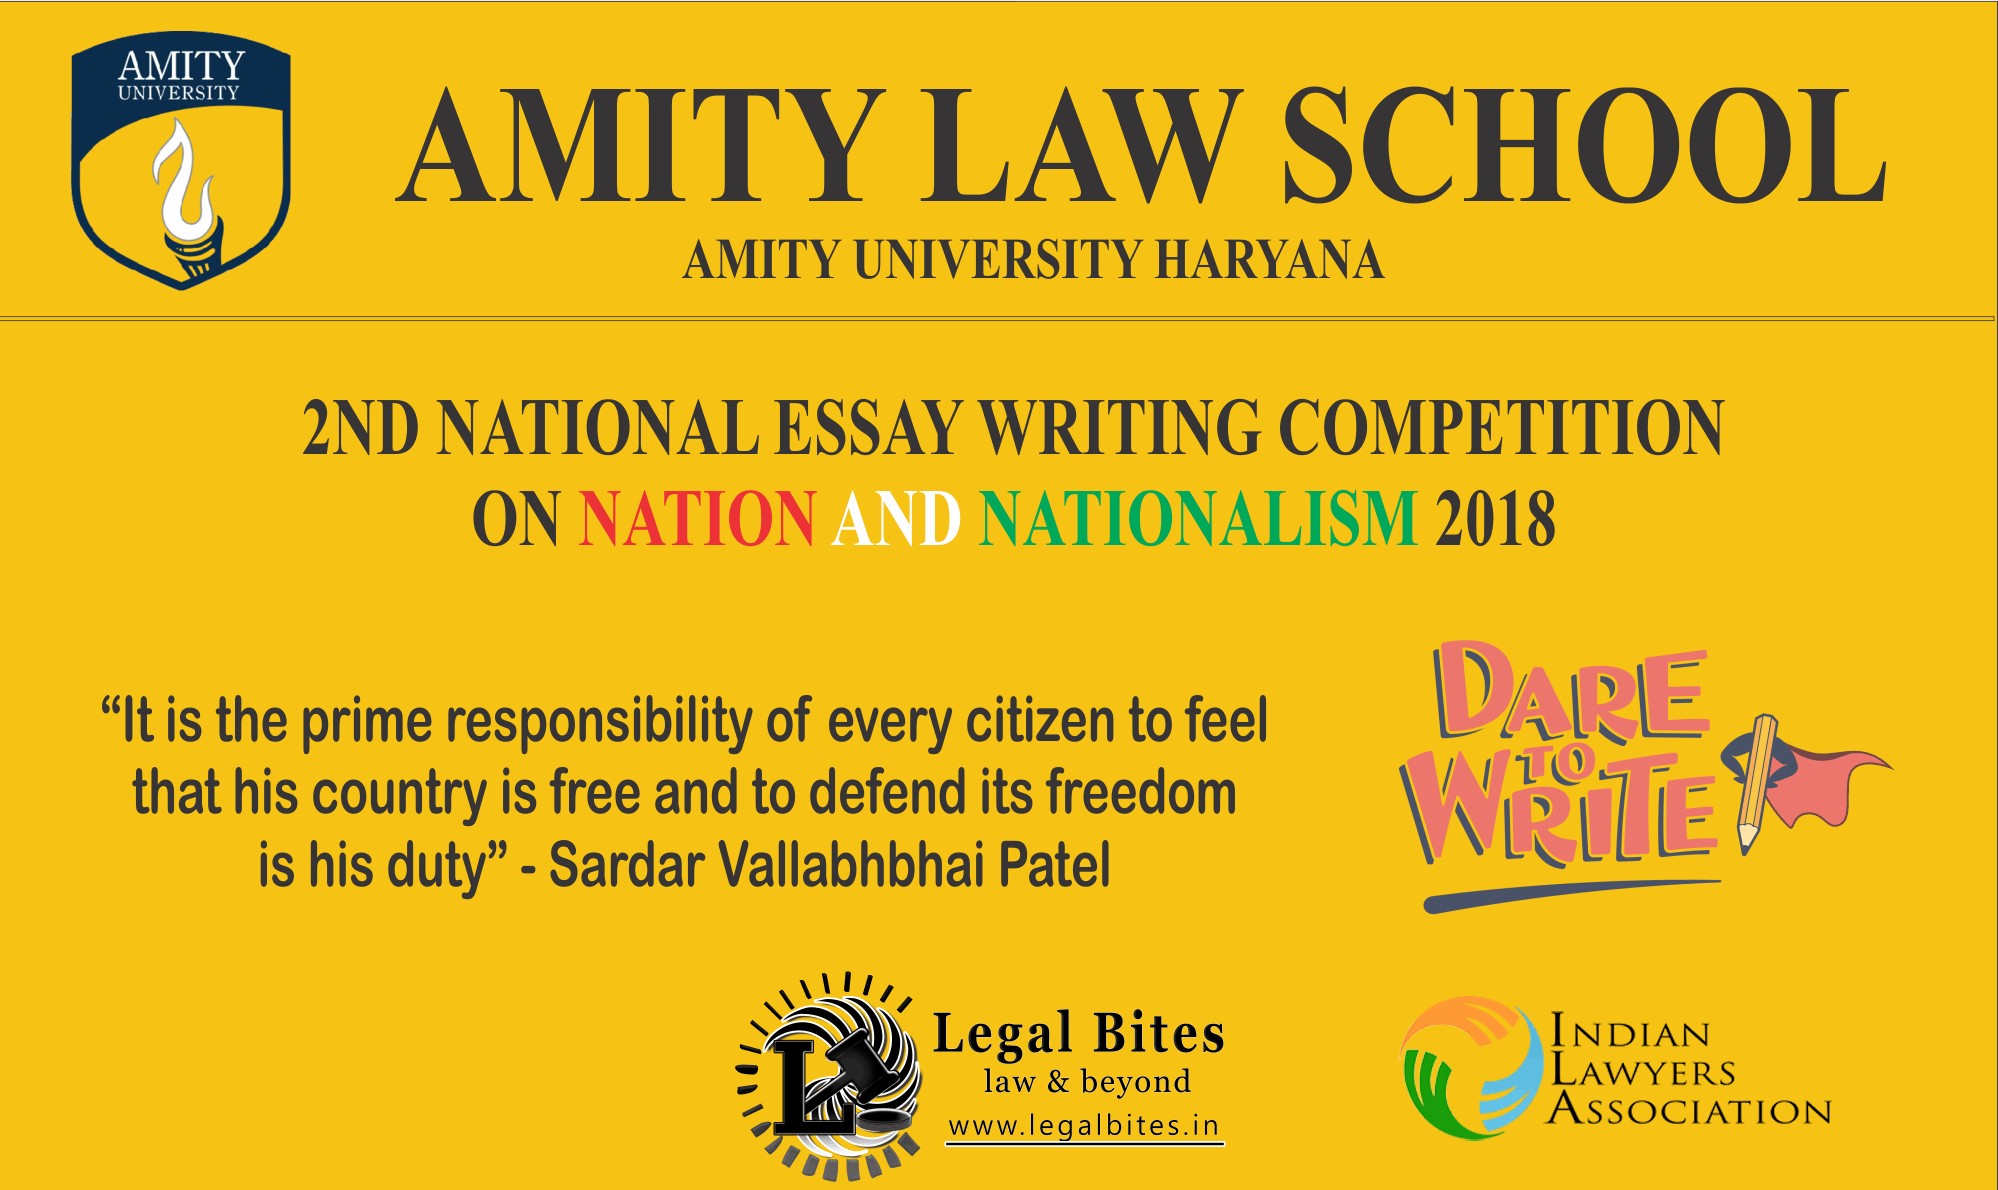 Result: 2nd National Essay Writing Competition On Nation And Nationalism 2018